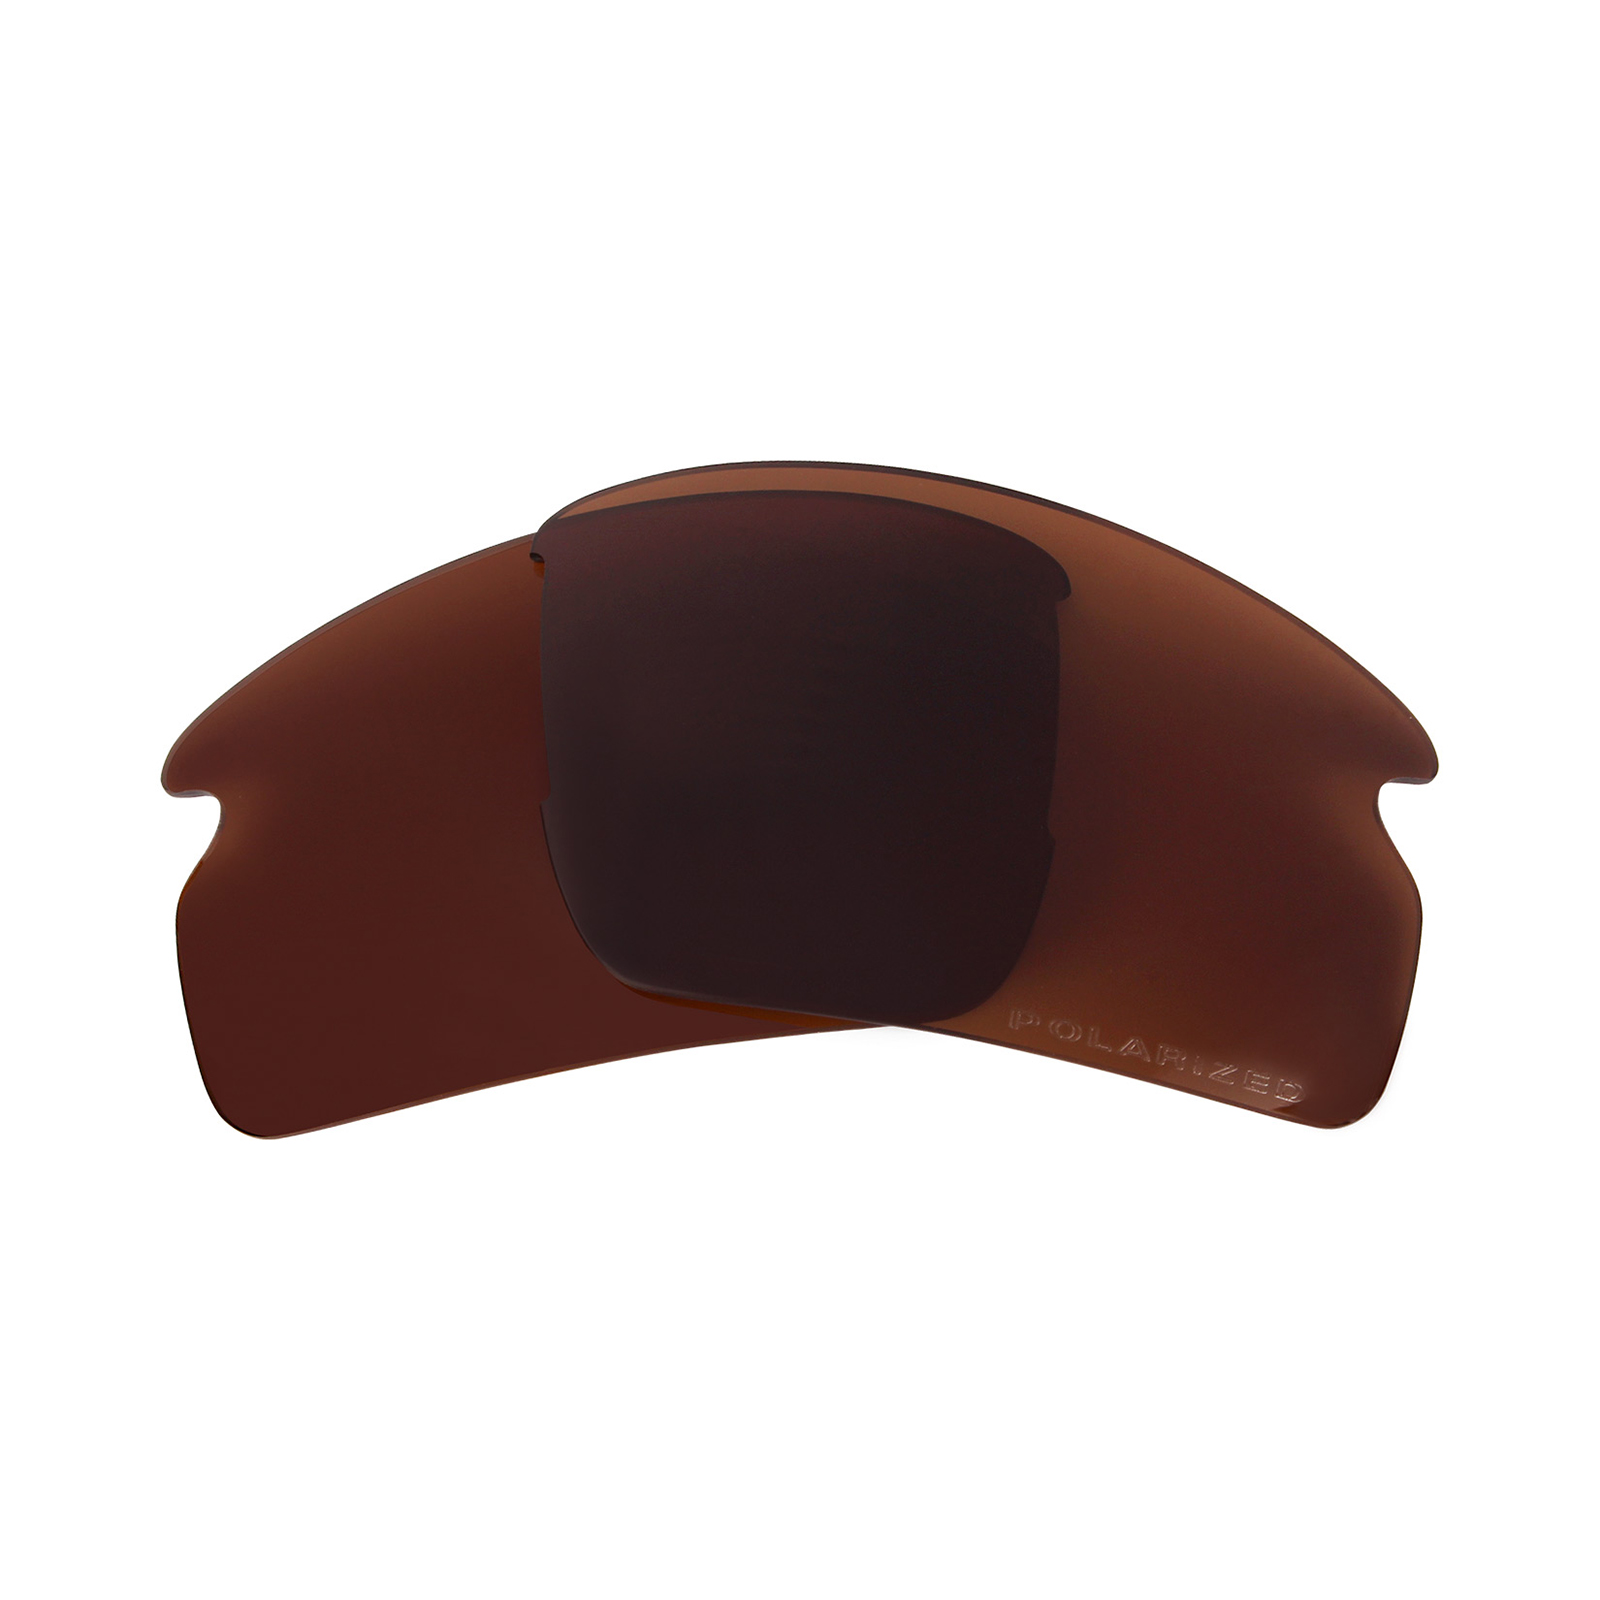 Replacement Polarized Lenses for Oakley Flak 2.0 OO9295 (Bronze Brown)